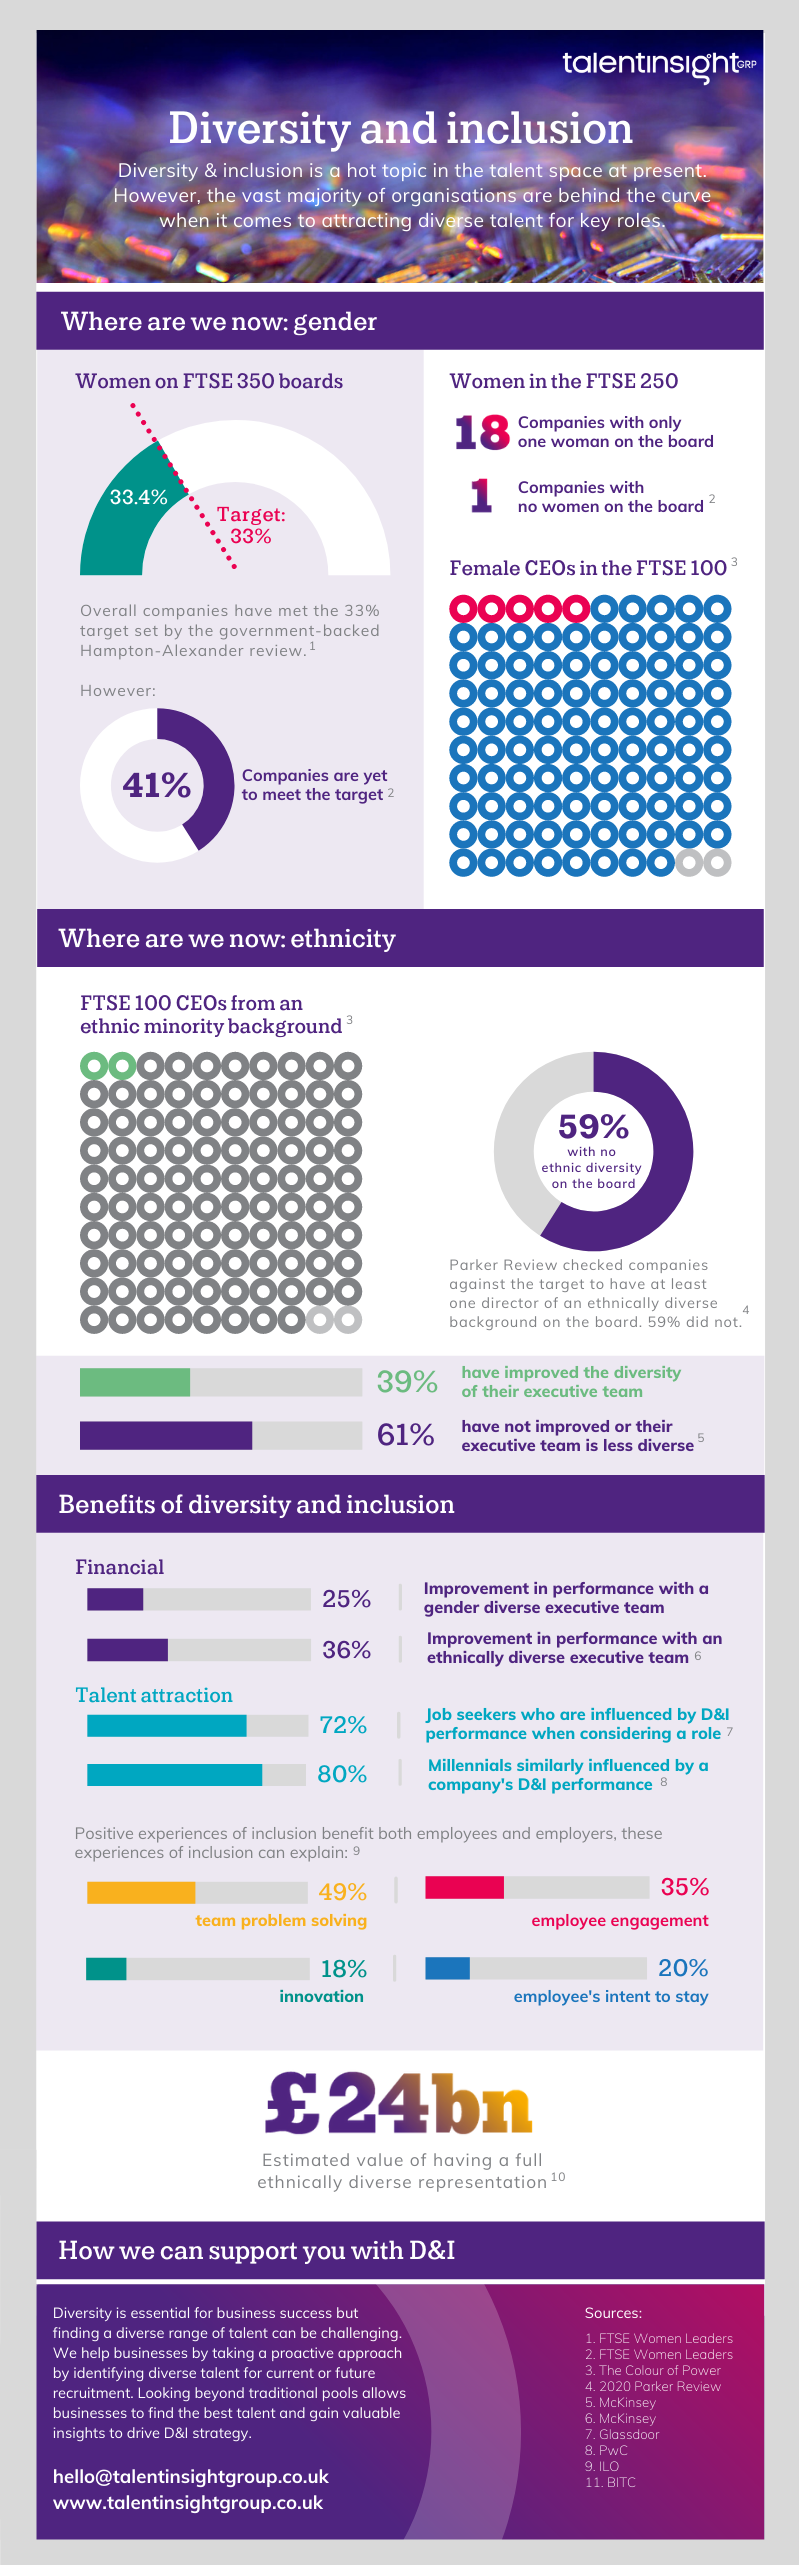 Diversity and inclusion infographic